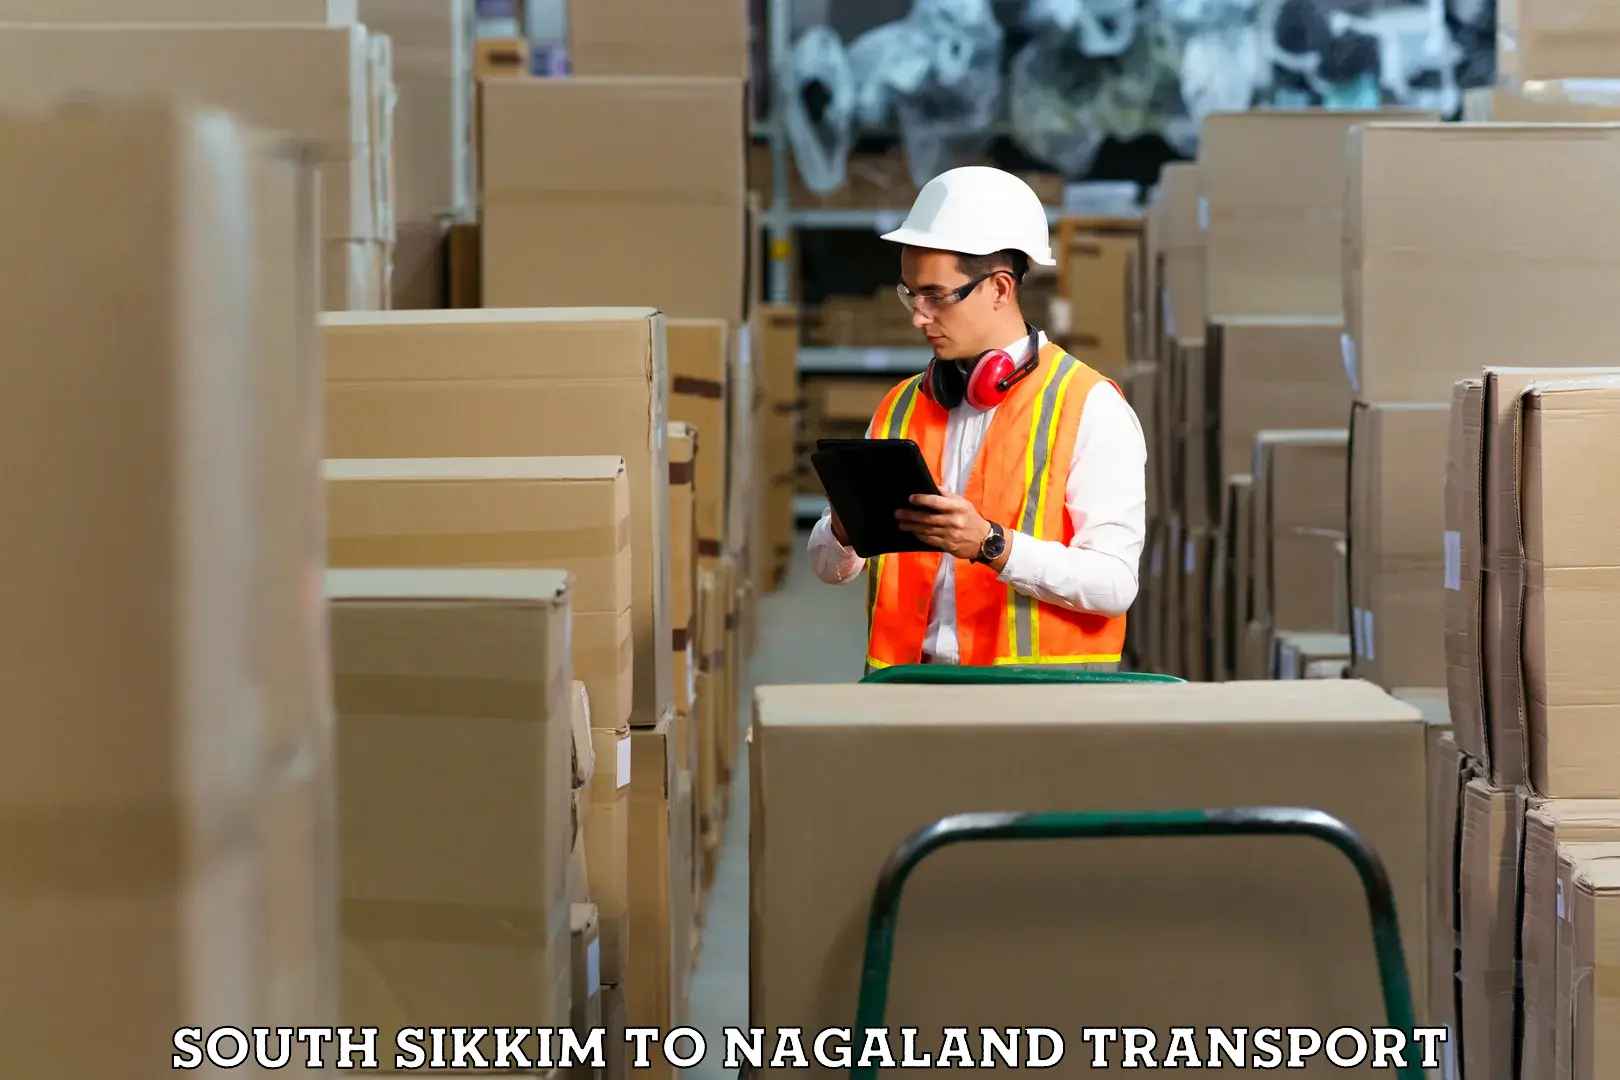 Daily transport service South Sikkim to Nagaland